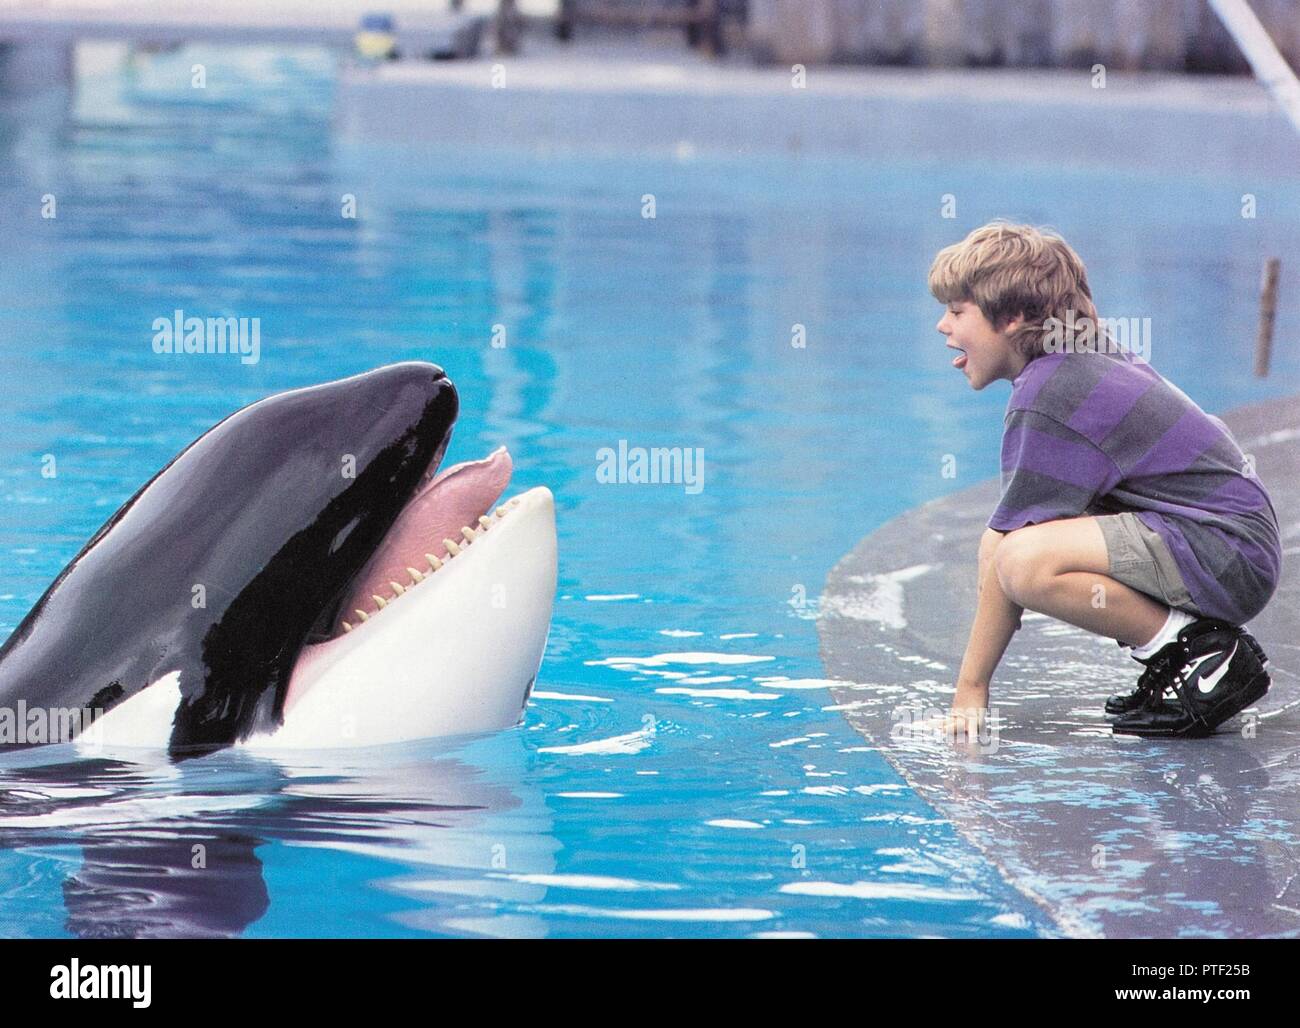 Original film title: FREE WILLY. English title: FREE WILLY. Year: 1993. Director: SIMON WINCER. Stars: JASON JAMES RICHTER. Credit: WARNER BROTHERS / Album Stock Photo